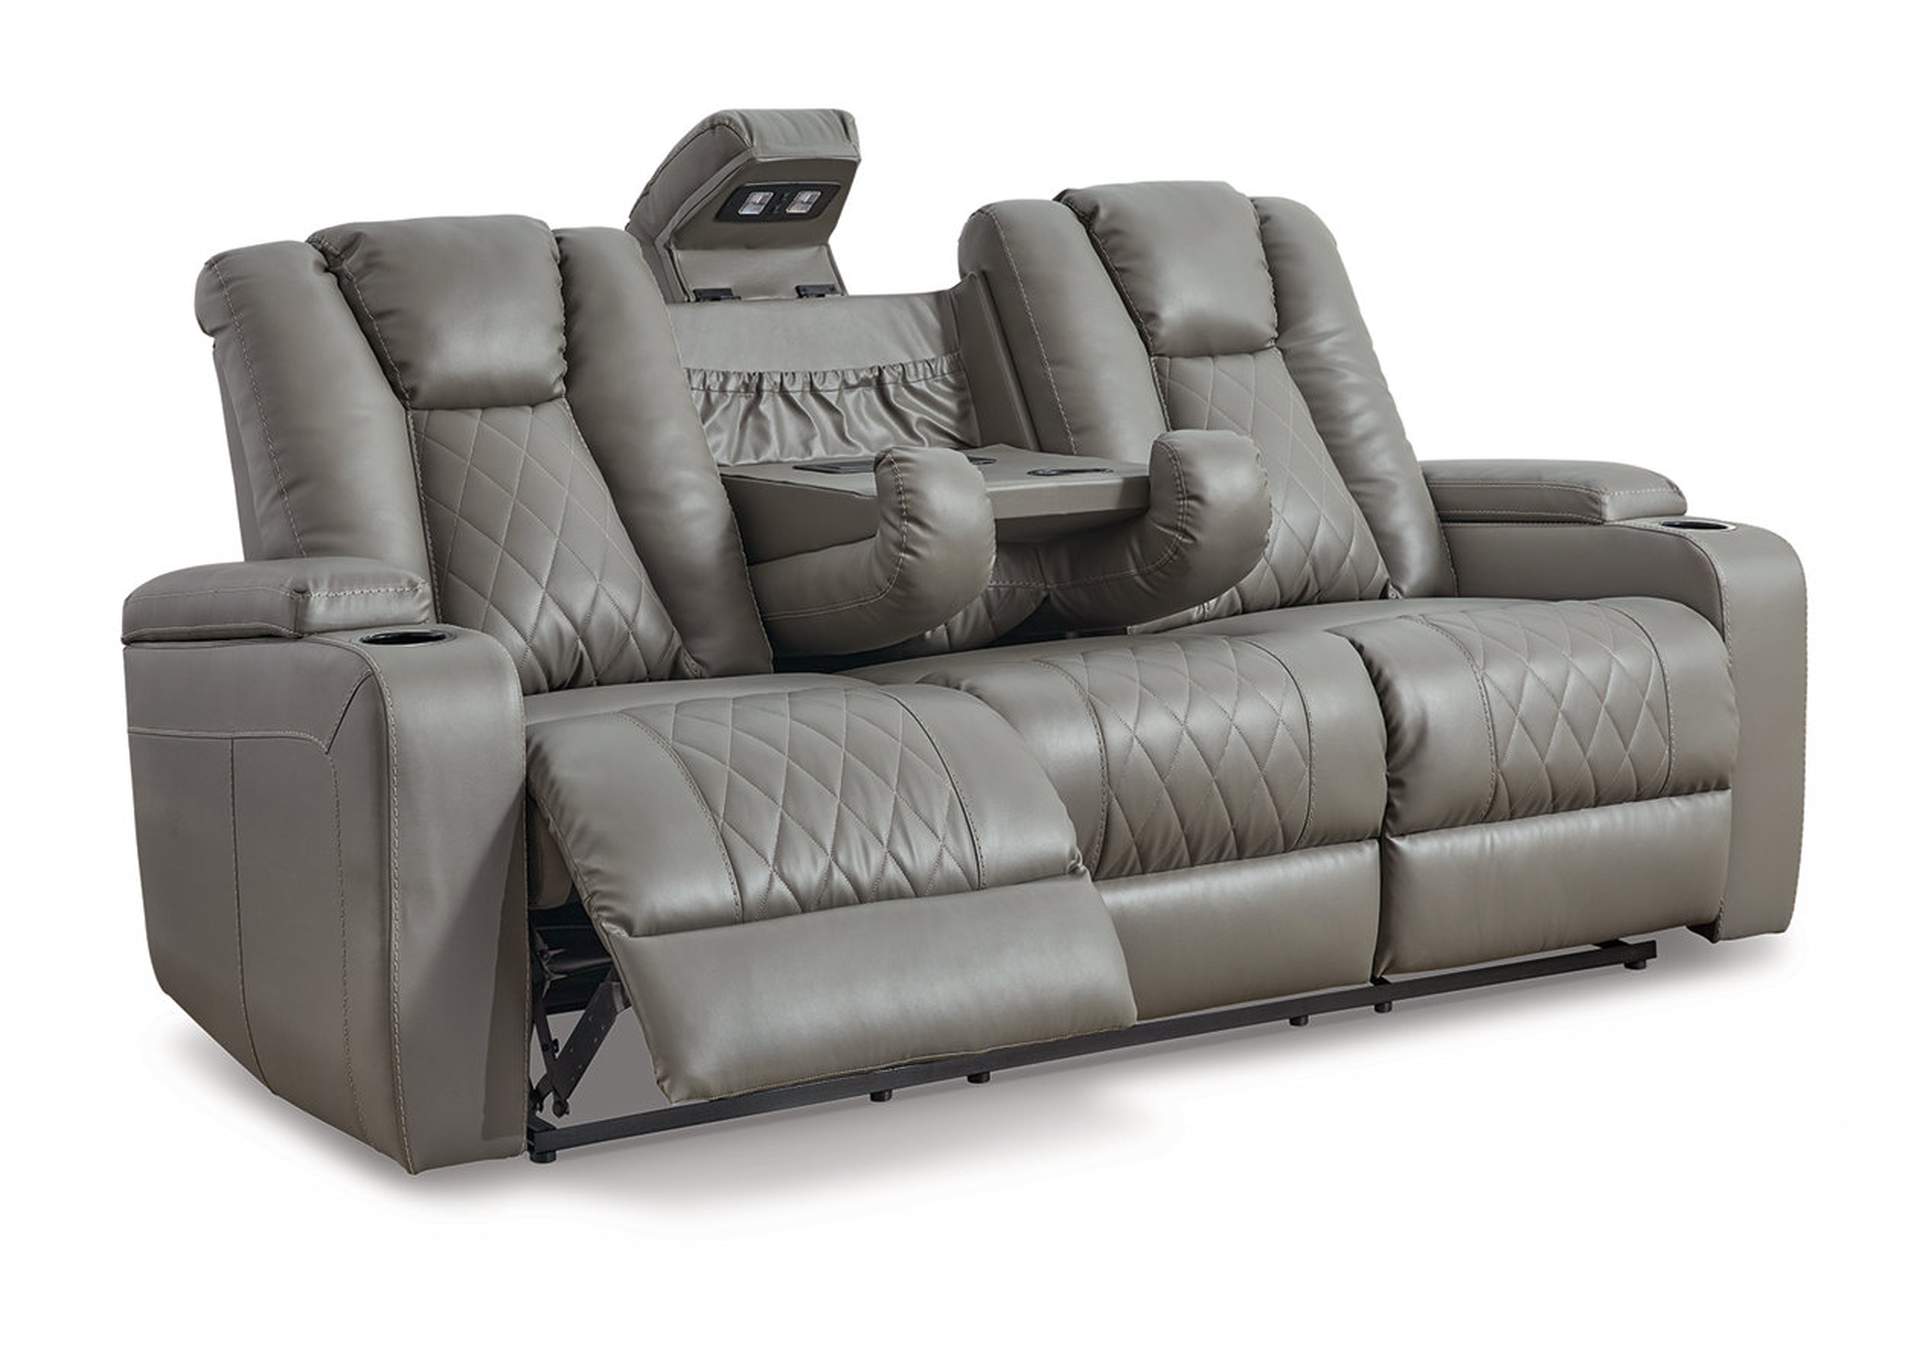 Mancin Reclining Sofa with Drop Down Table,Signature Design By Ashley